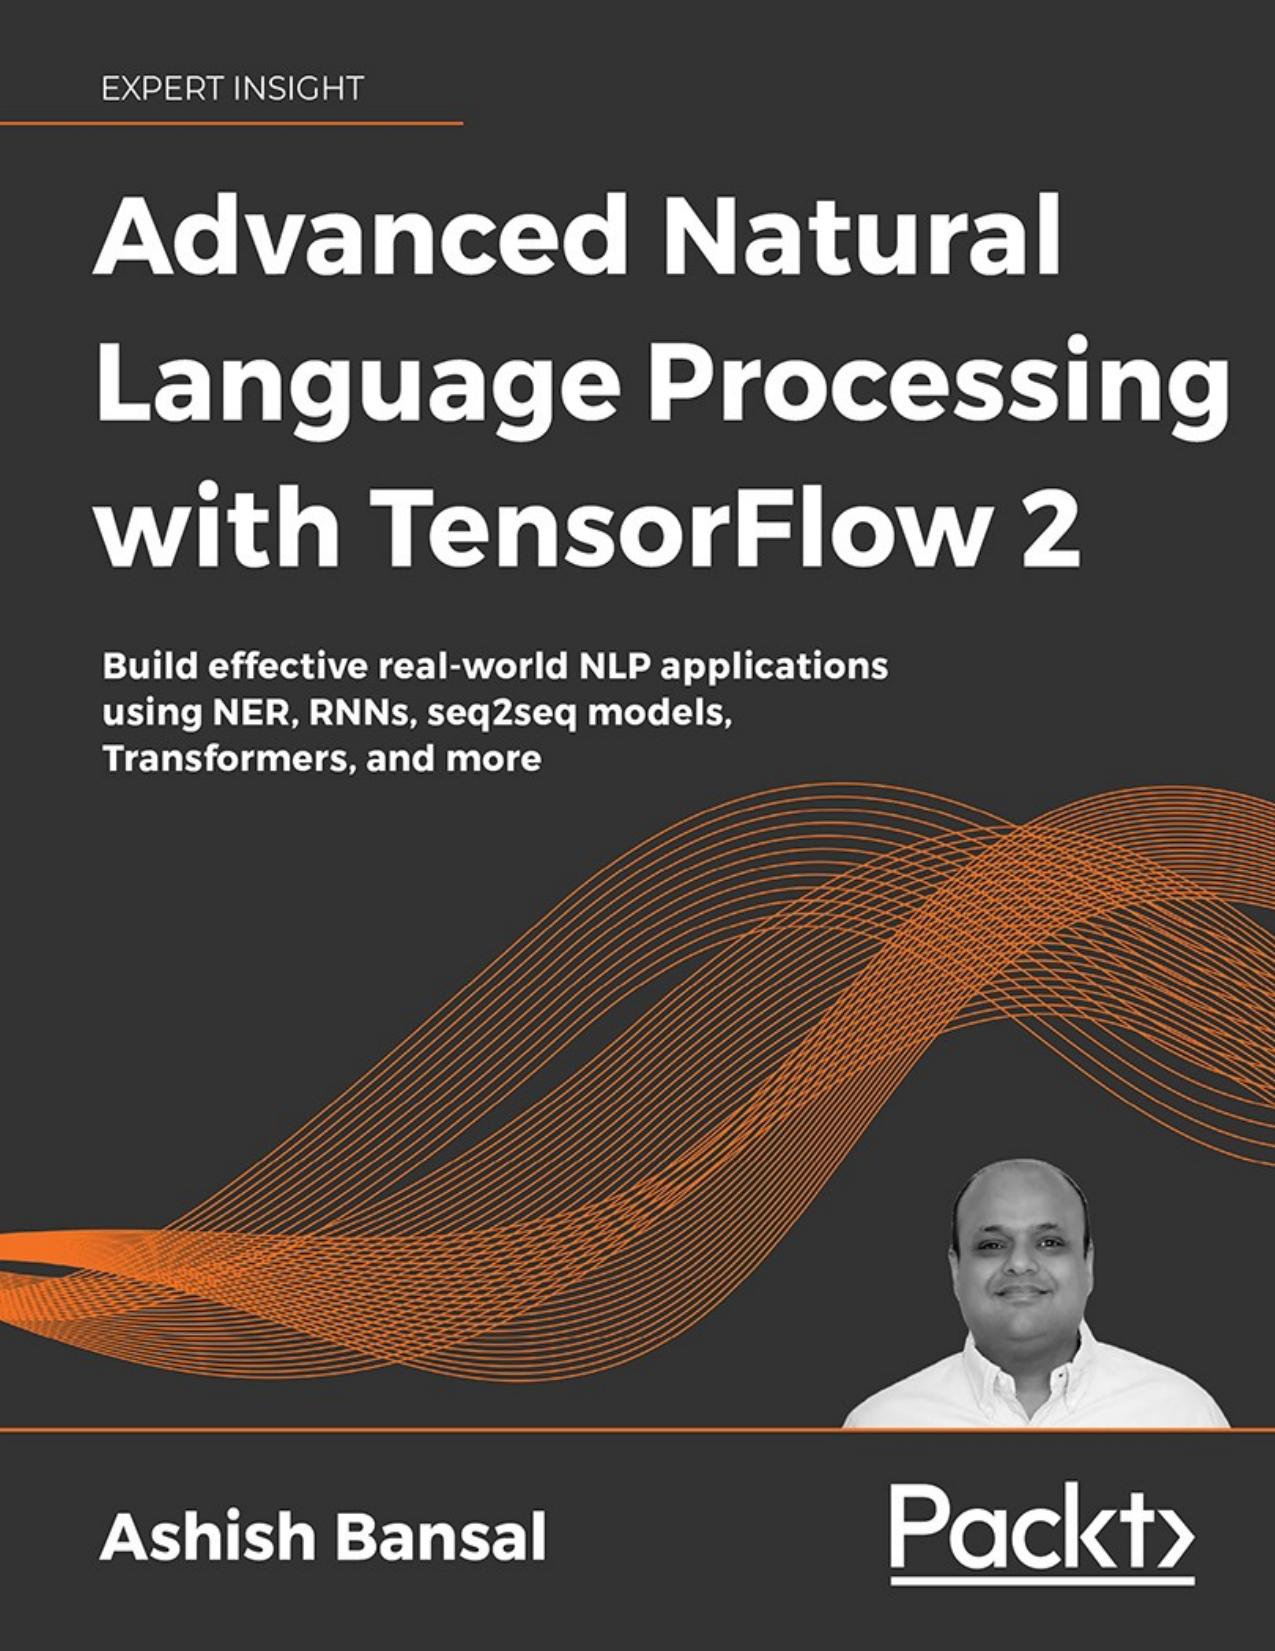 Advanced Natural Language Processing with TensorFlow 2: Build Effective Real-World NLP Applications using NER, RNNs, Seq2seq Models, Transformers, and More  Sözrtmsz Brtdion